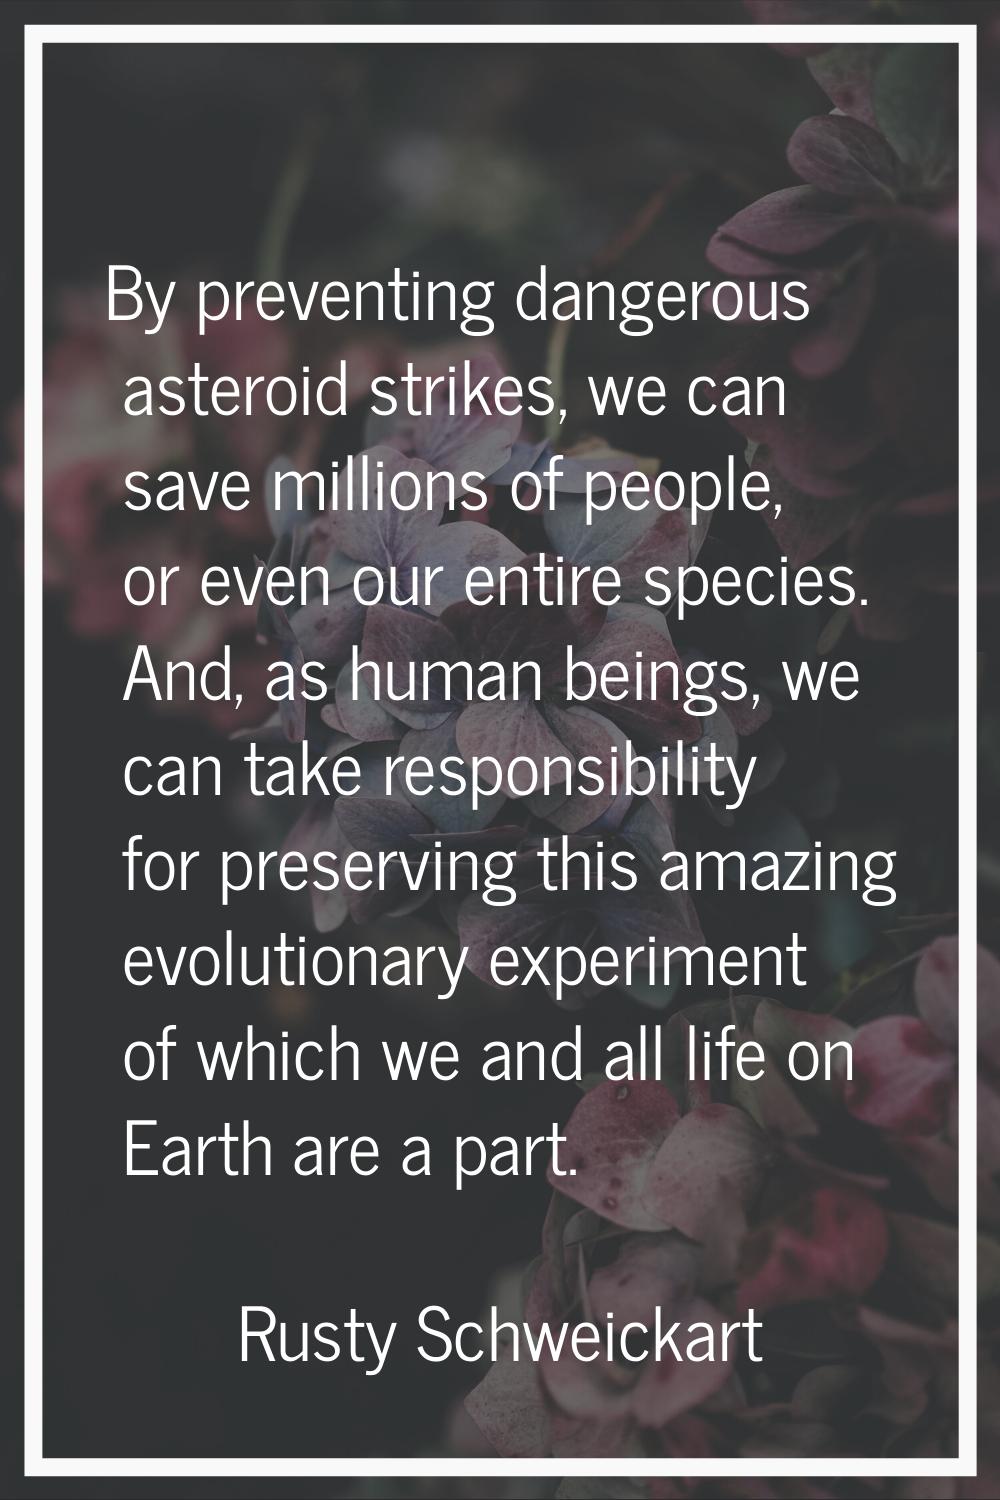 By preventing dangerous asteroid strikes, we can save millions of people, or even our entire specie